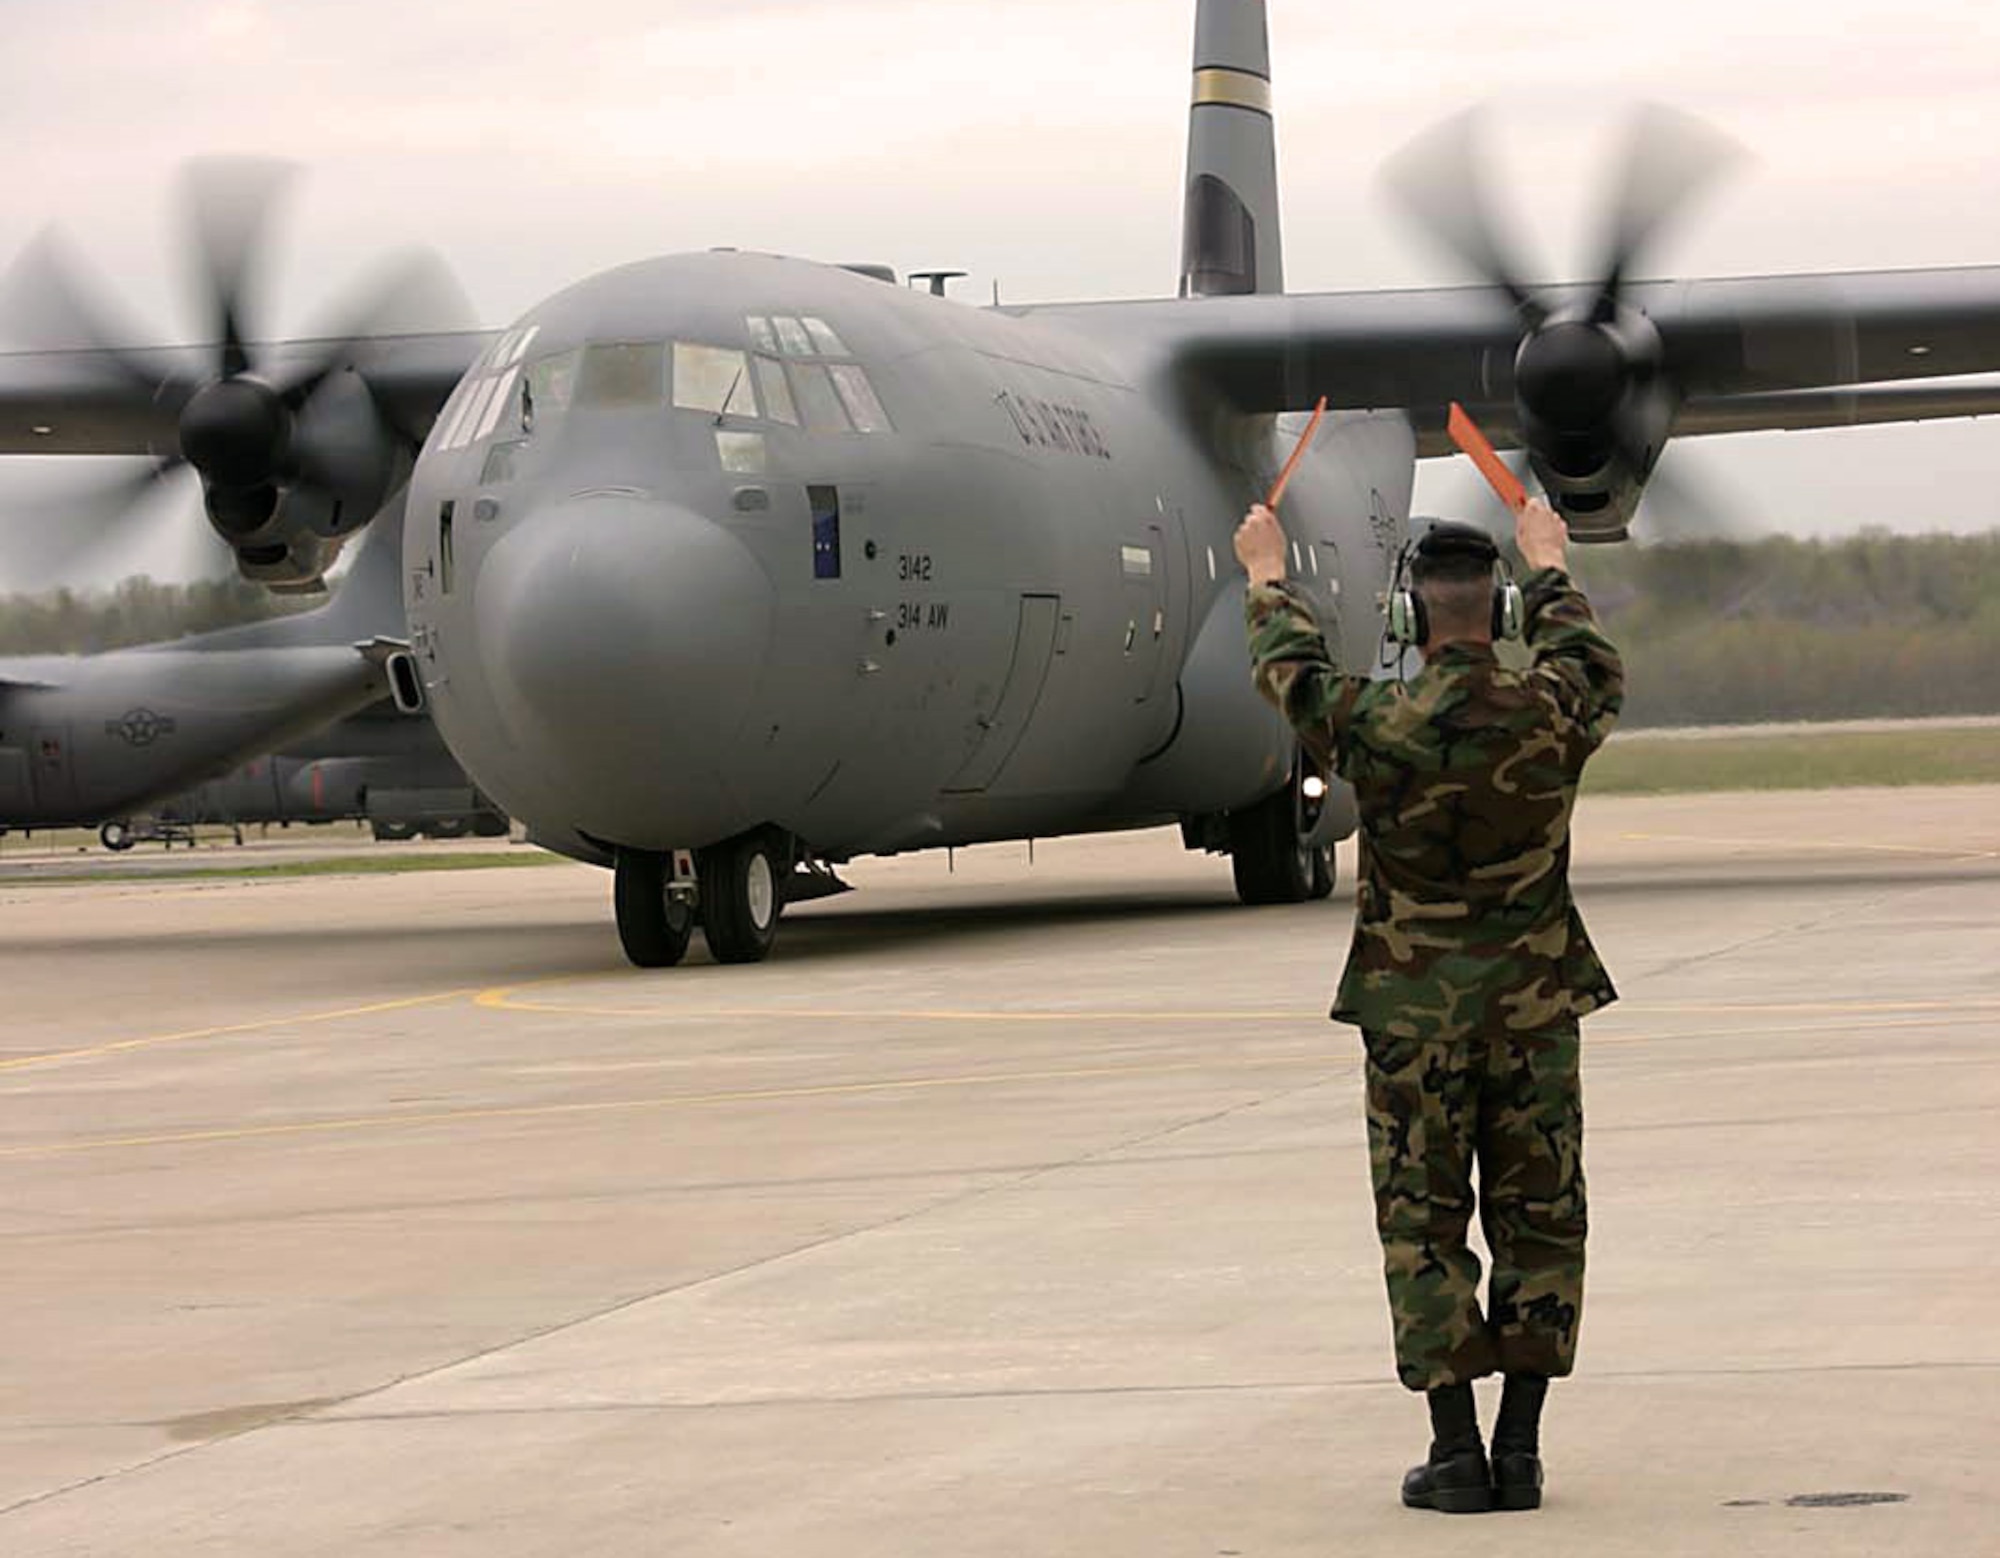 LITTLE ROCK AIR FORCE BASE, Ark. -- Tech. Sgt. Jonathan Rebidue marshals in the Air Force's second active-duty J-model C-130 Hercules here April 5.  Sergeant Rebidue is a C-130 dedicated crew chief.  (U.S. Air Force photo by Airman 1st Class Tim Bazar)